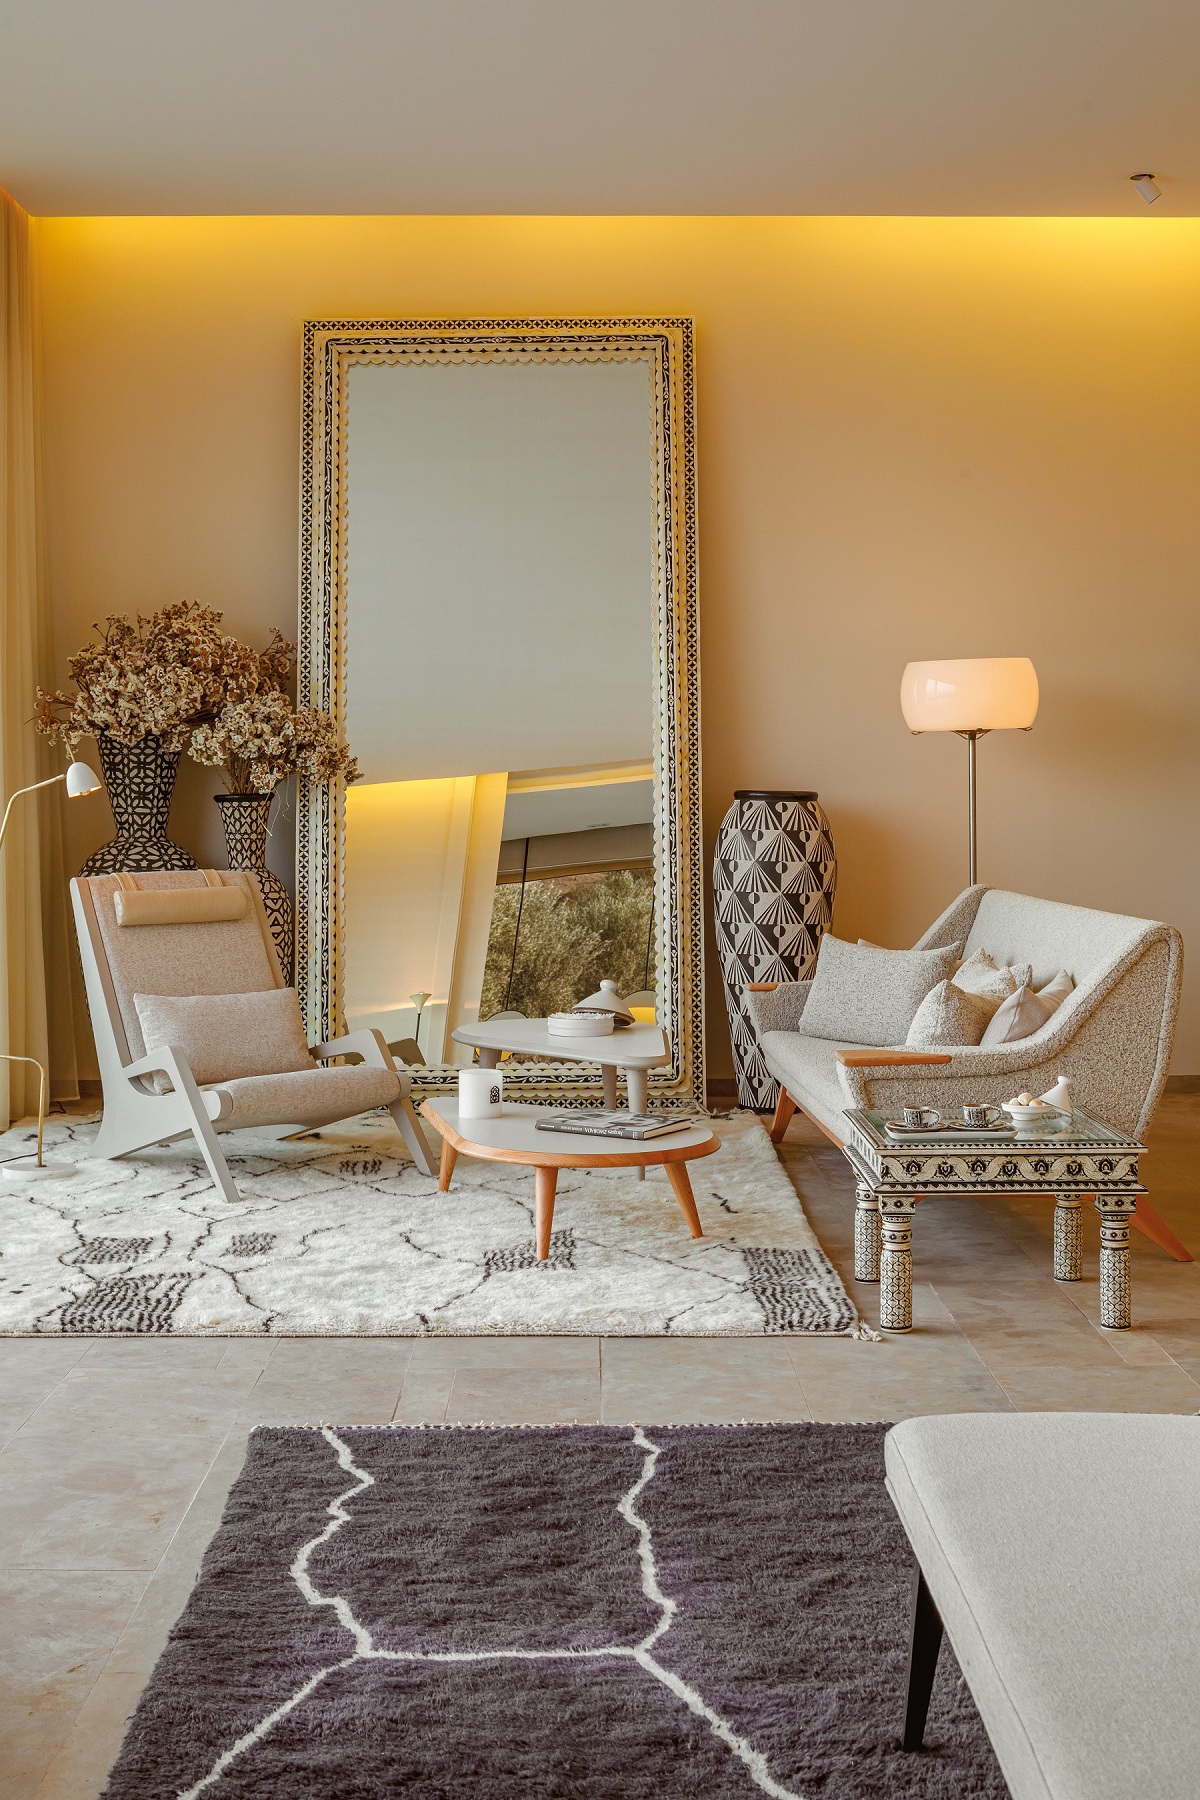 guestroom with brown moroccan carpet on the floor with a cream and wood textured seating area in front of a mirror